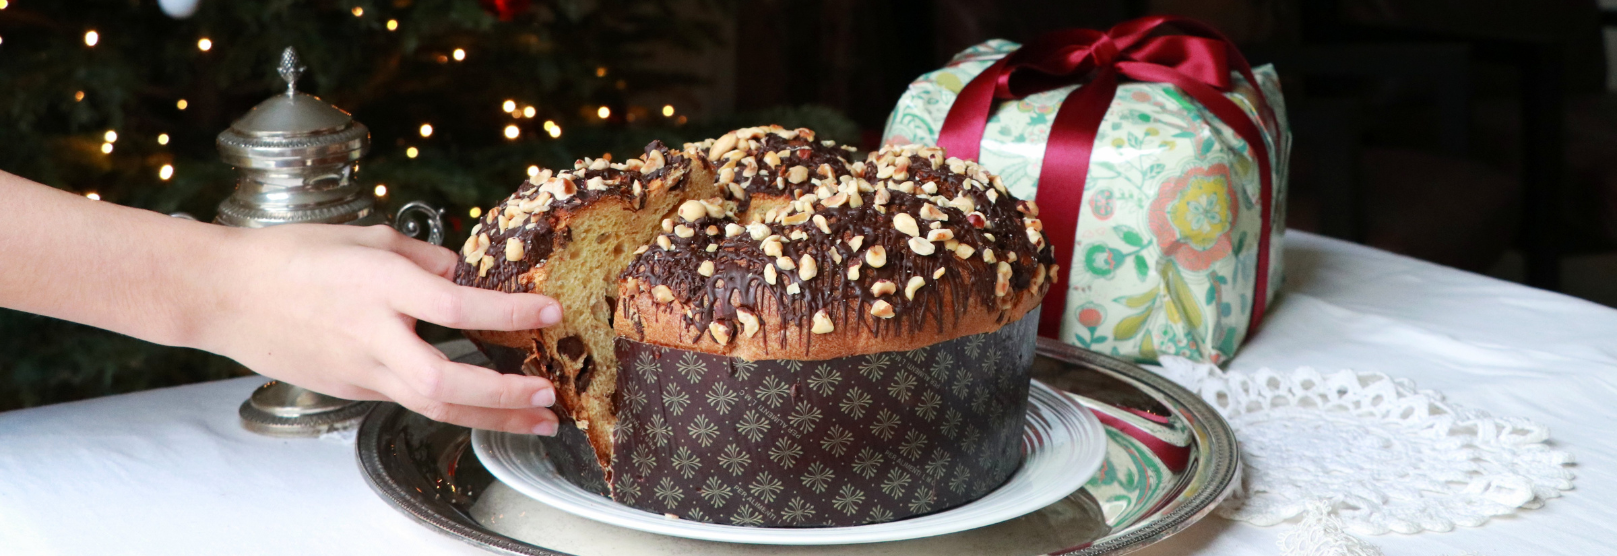 Panettone: the most famous Italian Christmas Cake